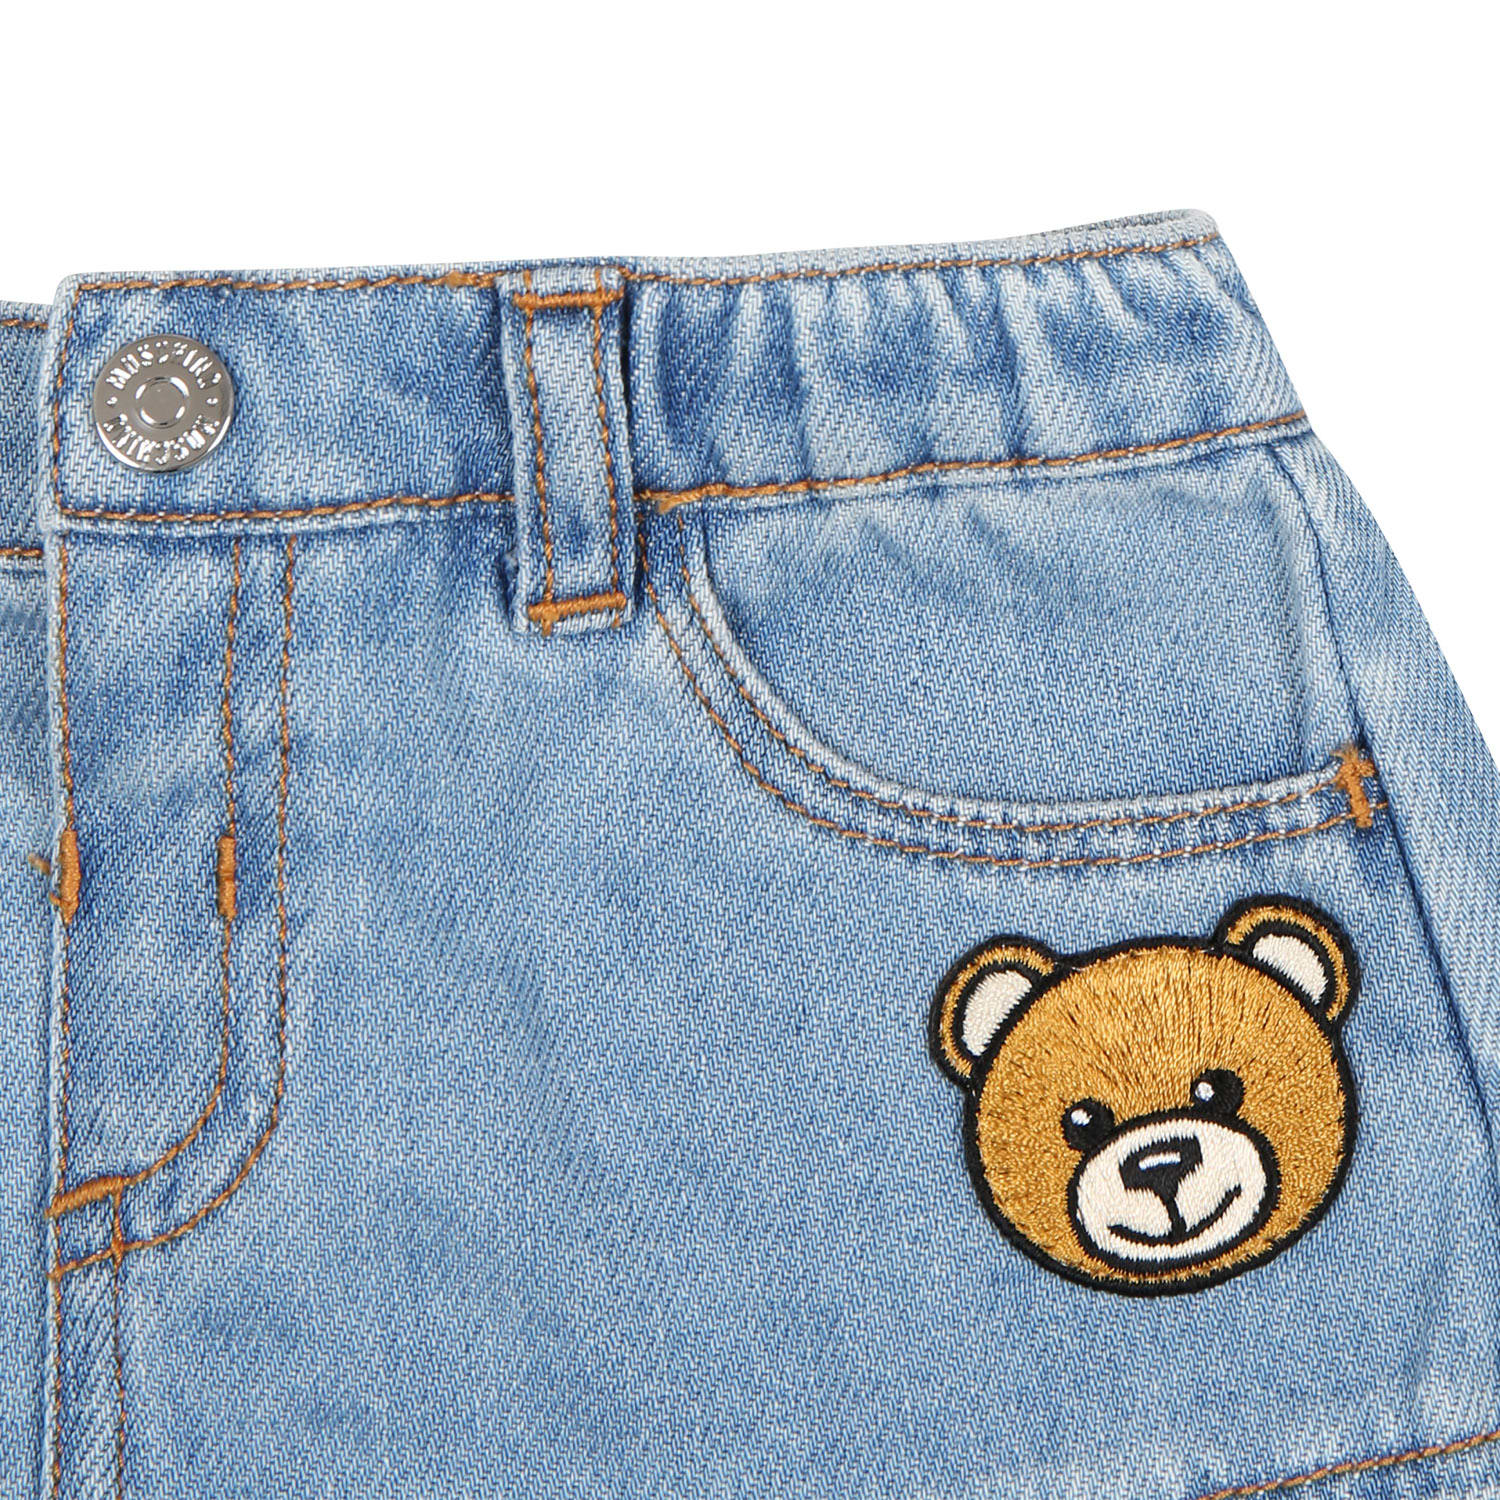 Shop Moschino Casual Denim Skirt For Baby Girl With Teddy Bear In Blue